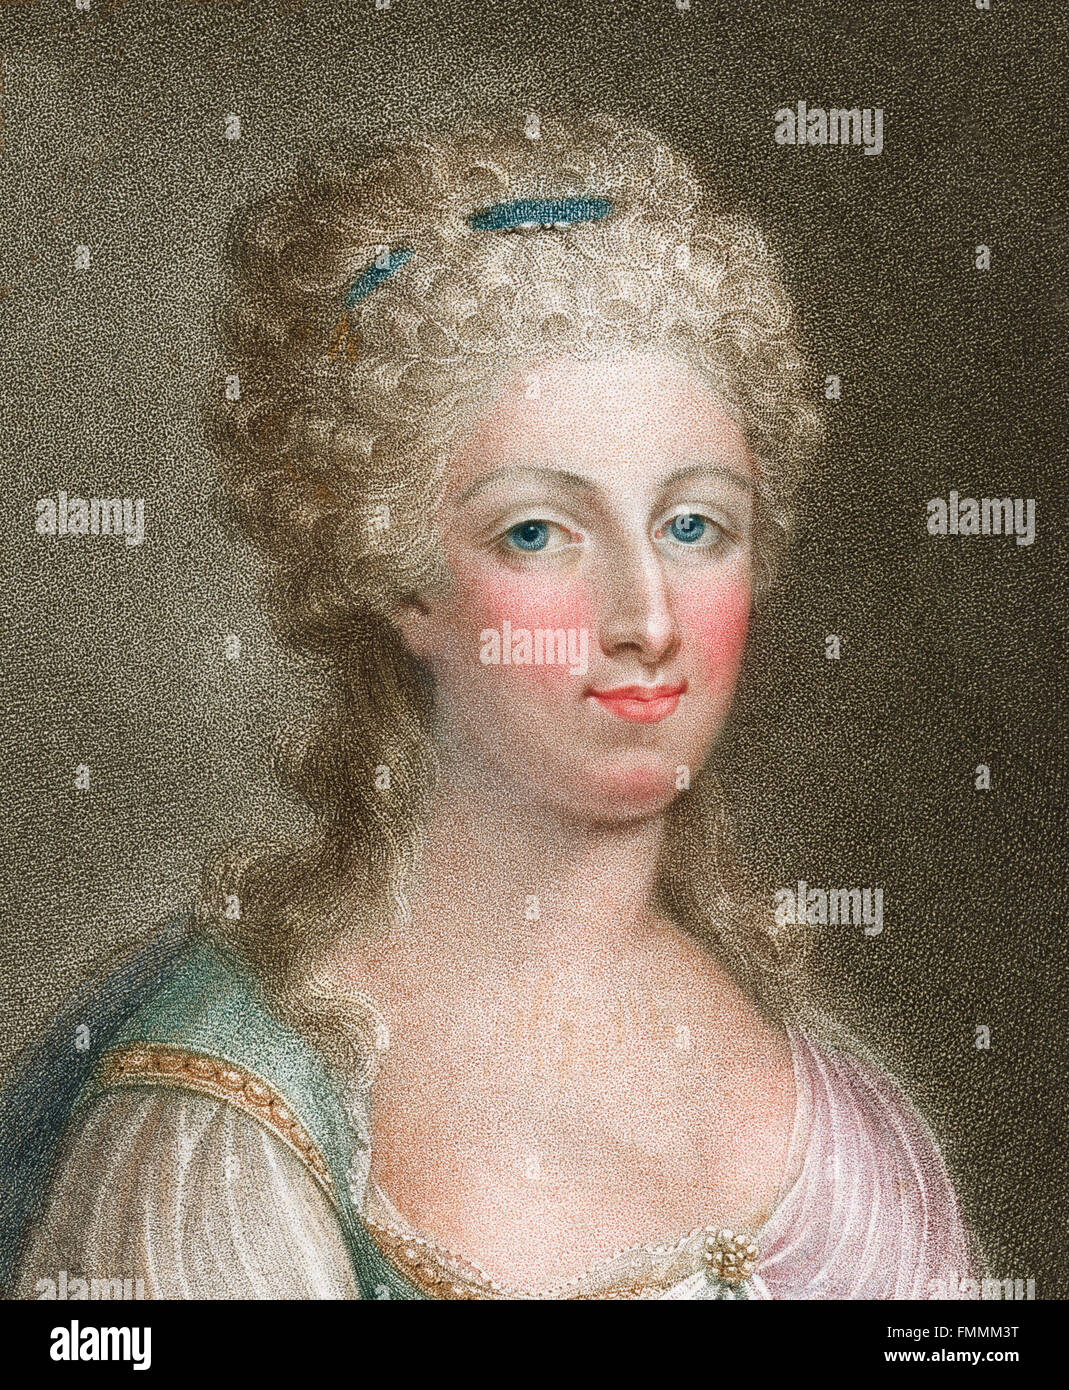 Portrait of Marie Antoinette, Queen of France and wife of King Louis XVI. Engraving by Marino Bovi from a painting by Louise-Elisabeth Vigée-Lebrun, c.1800 Stock Photo